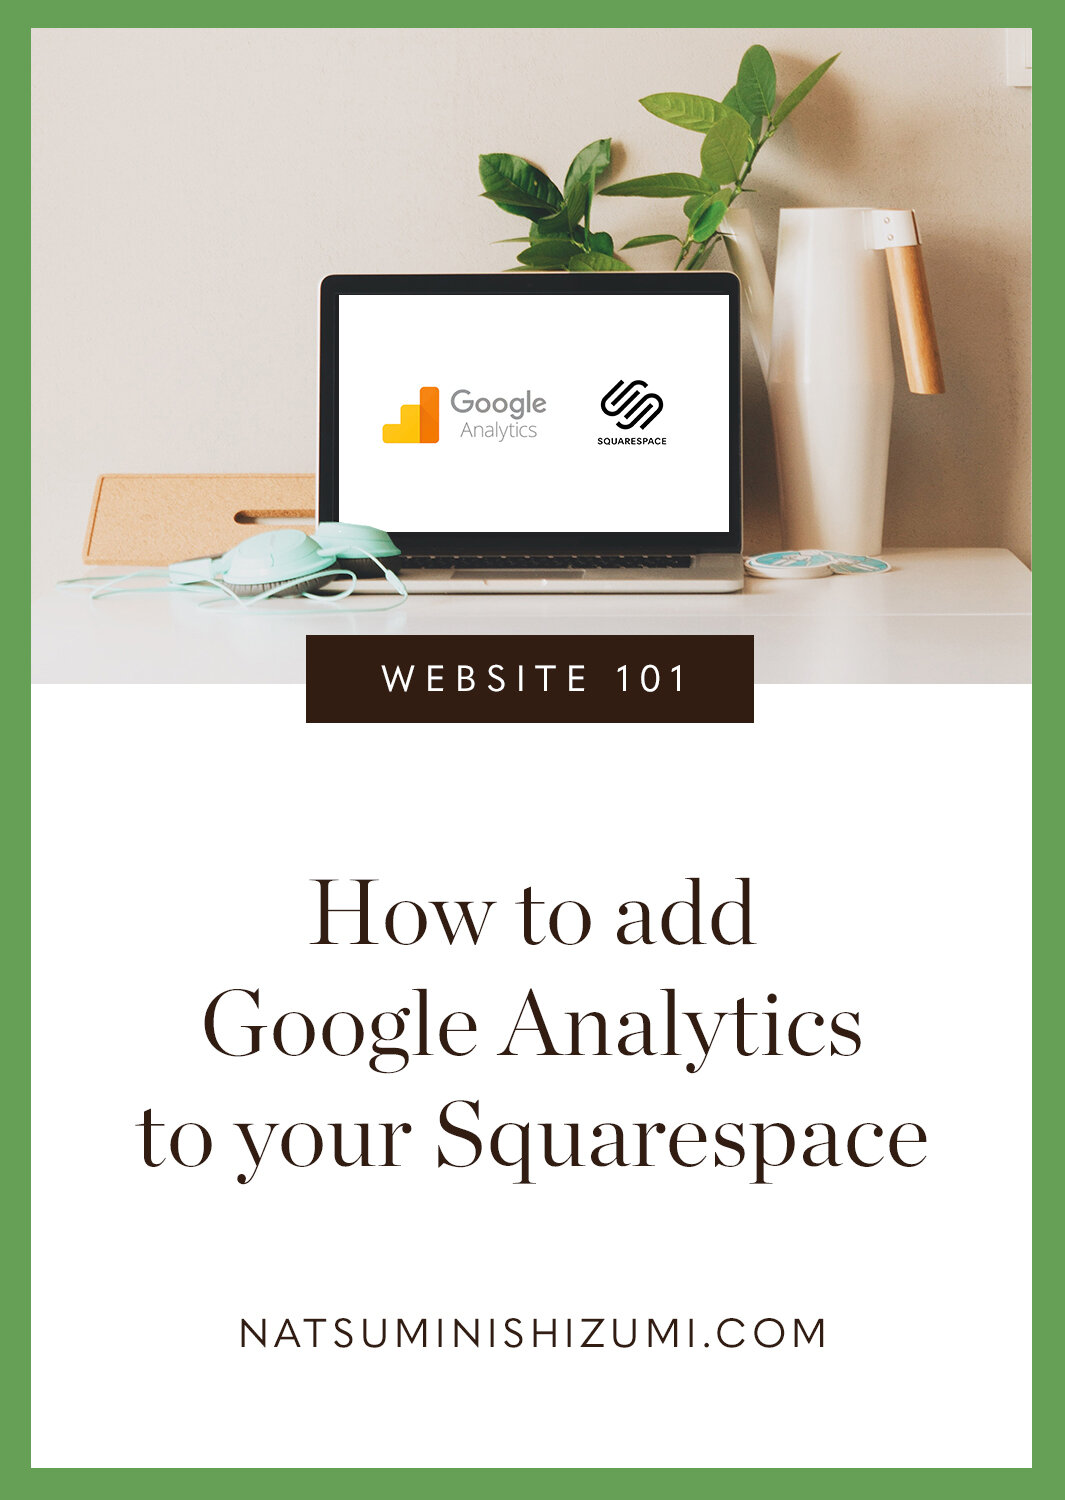 Adding Google Analytics to your Squarespace helps you provide a much more in-depth analysis